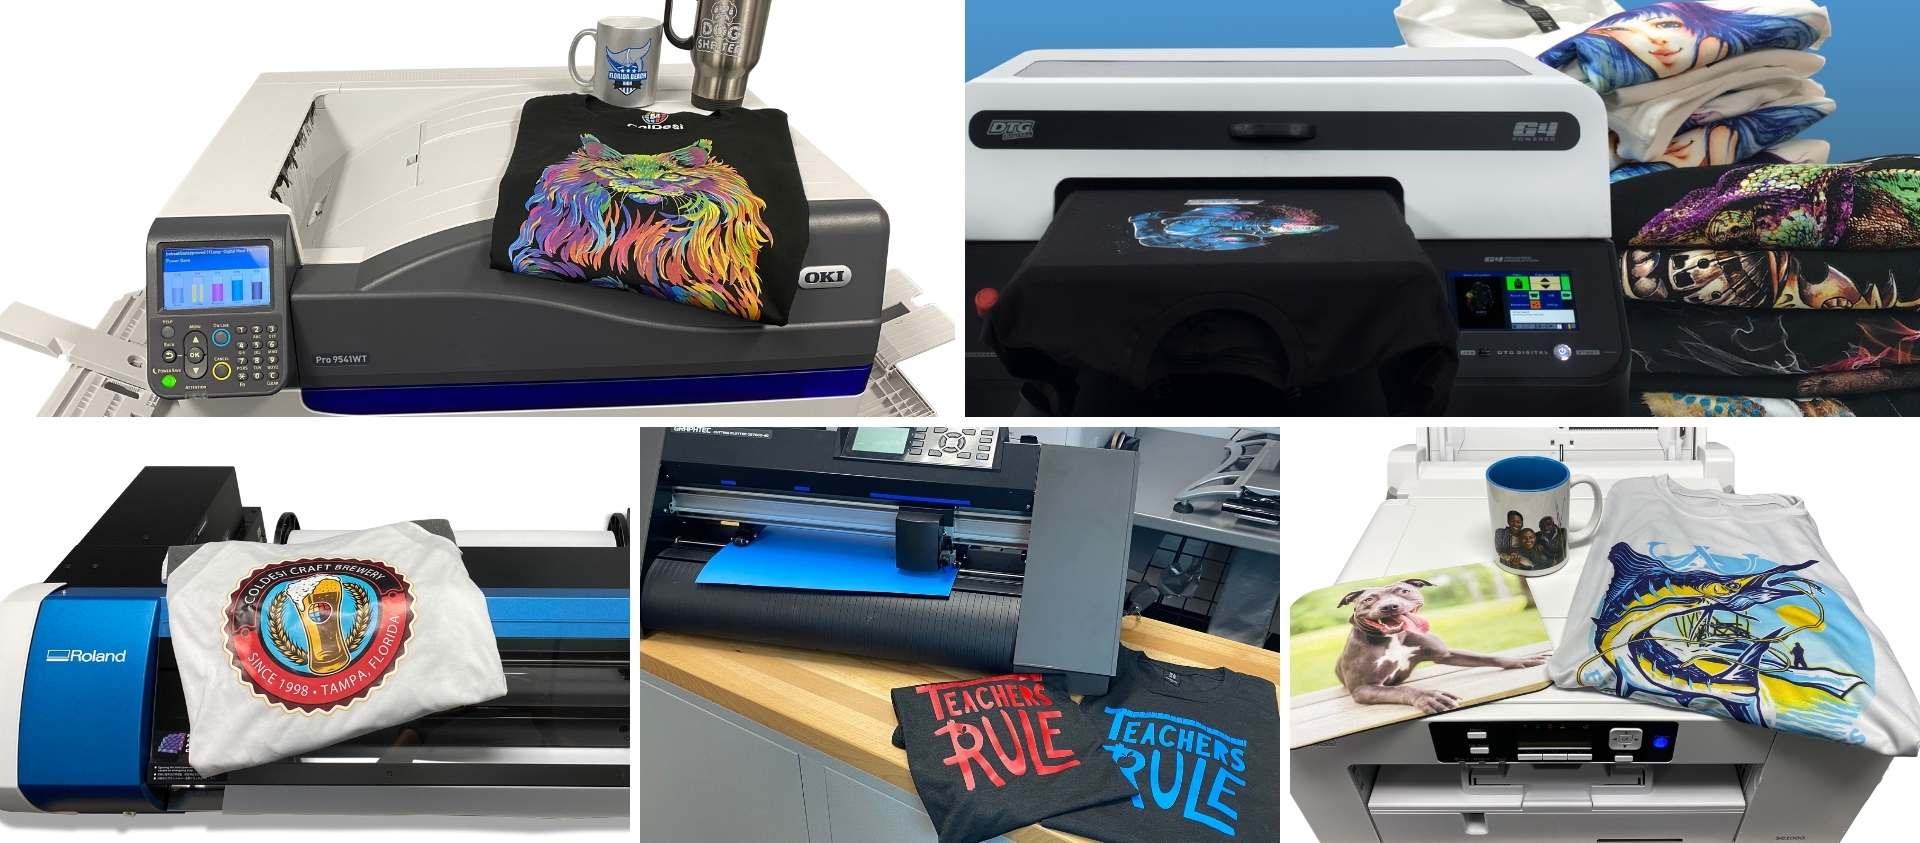 How Much Does It Cost? Comparing Pricing and Payments on Custom T-Shirt Printing Equipment